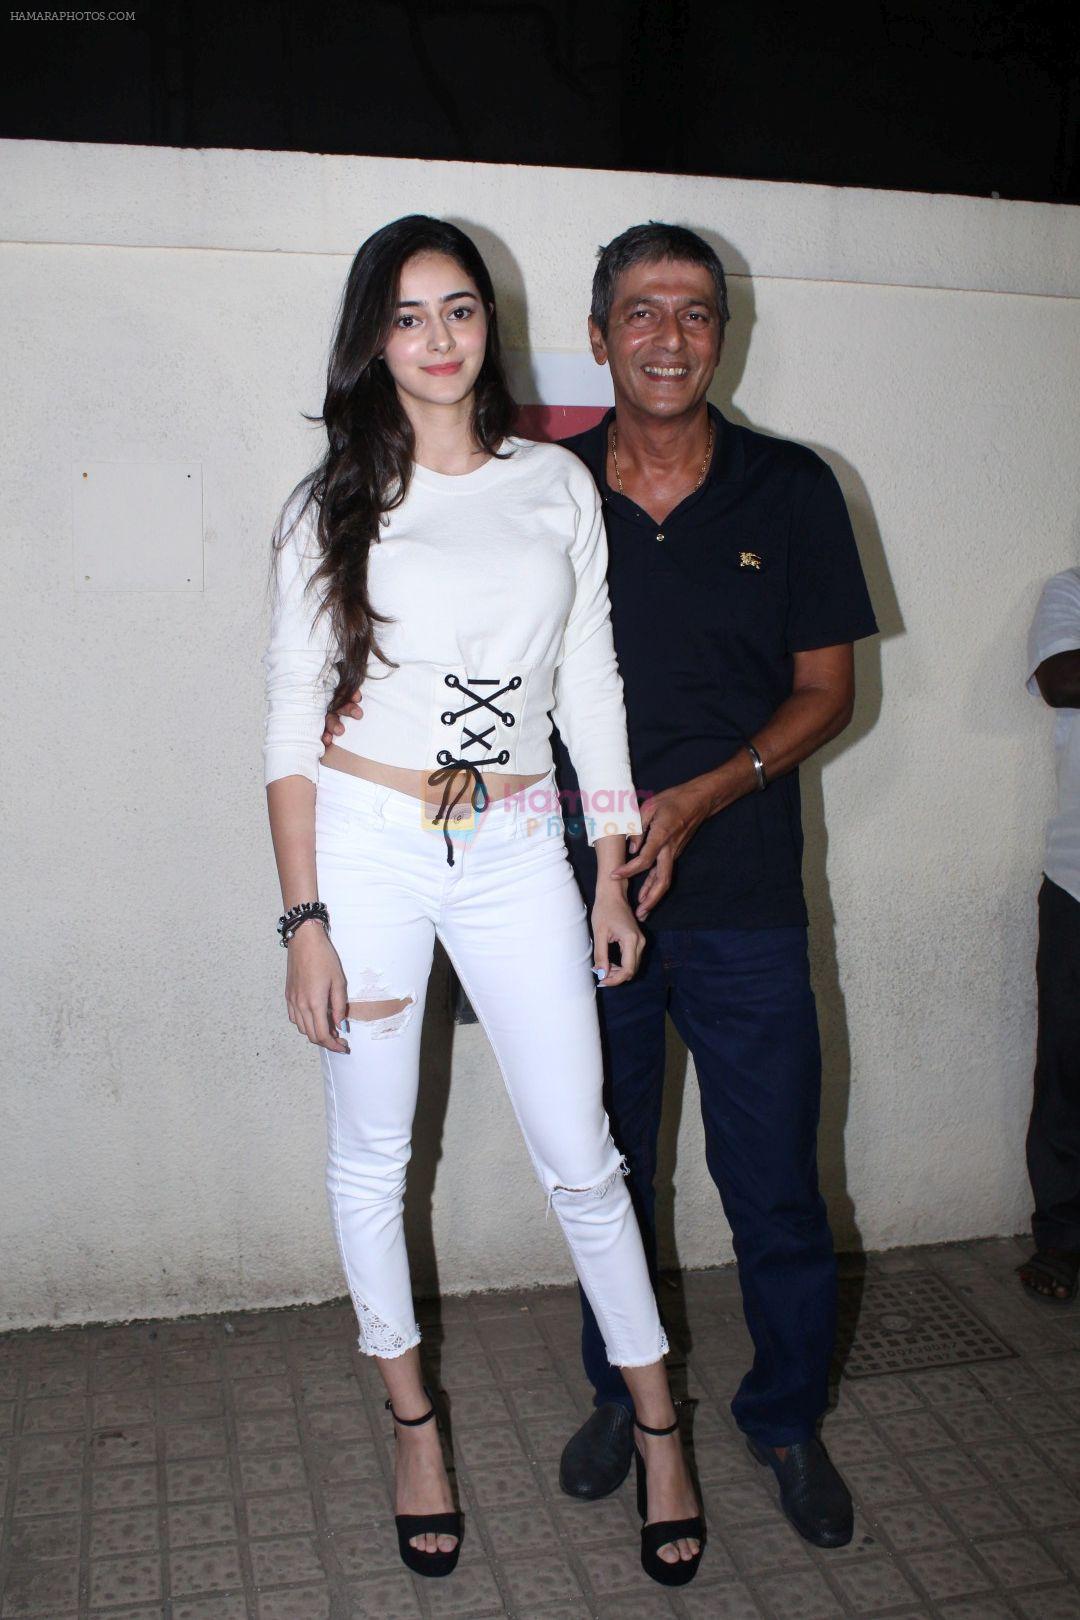 Chunky Pandey At Special Screening Of Film Judwaa 2 on 29th Sept 2017